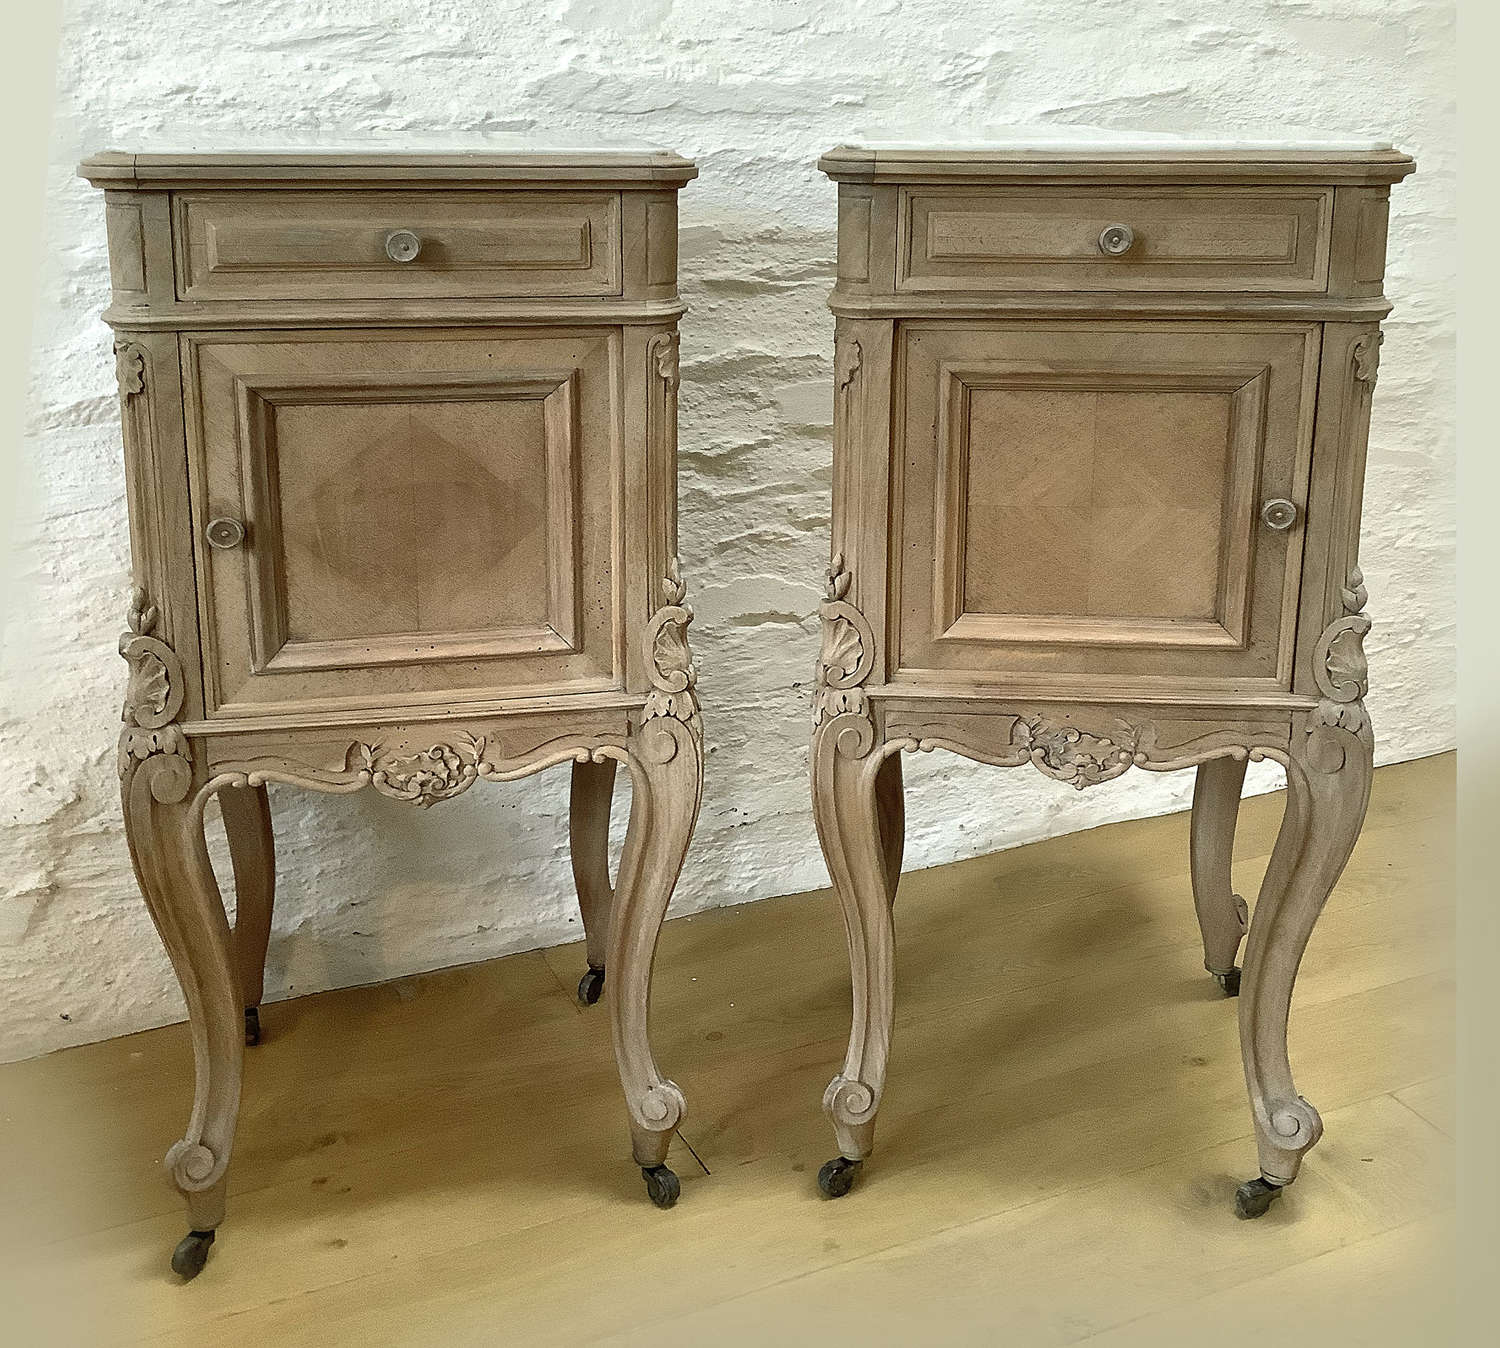 Pair of 19th Century bleached walnut bedside cabinets